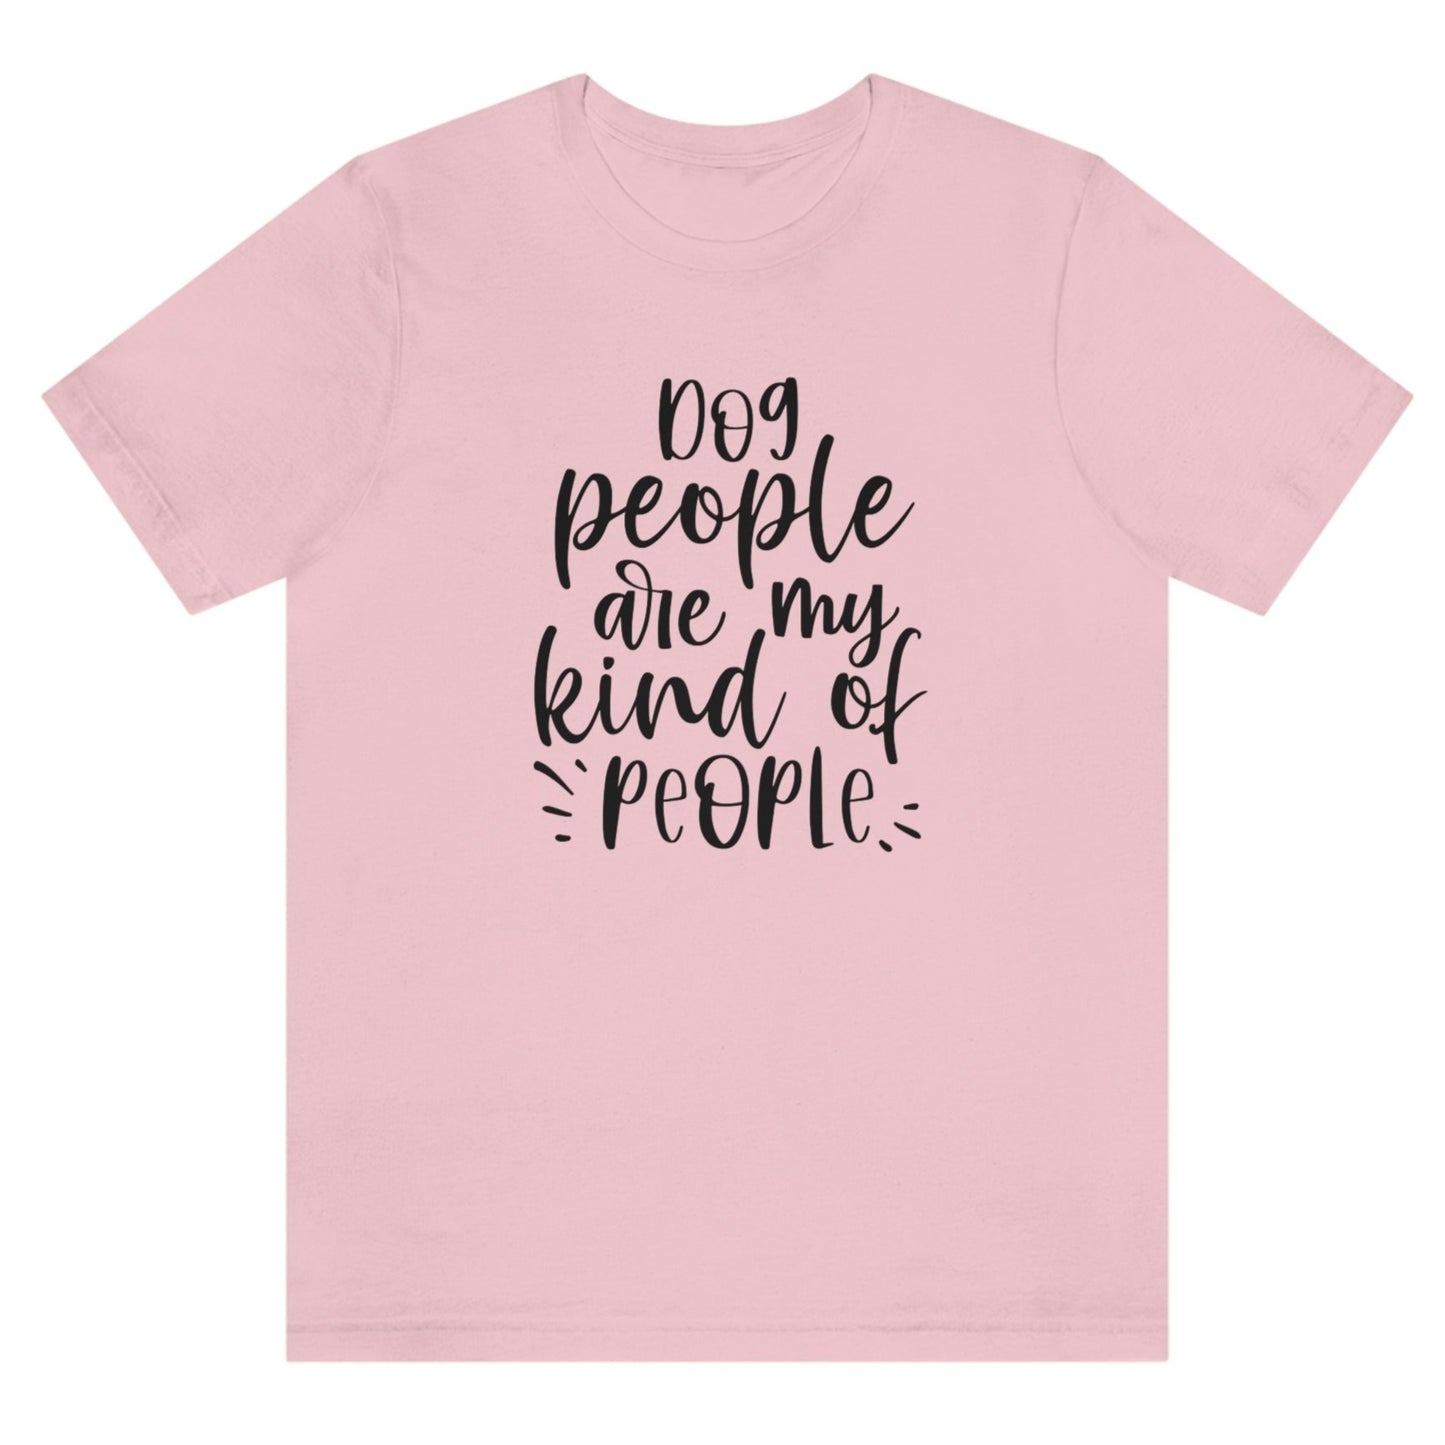 dog-people-are-my-kind-of-people-pink-t-shirt-animal-lover